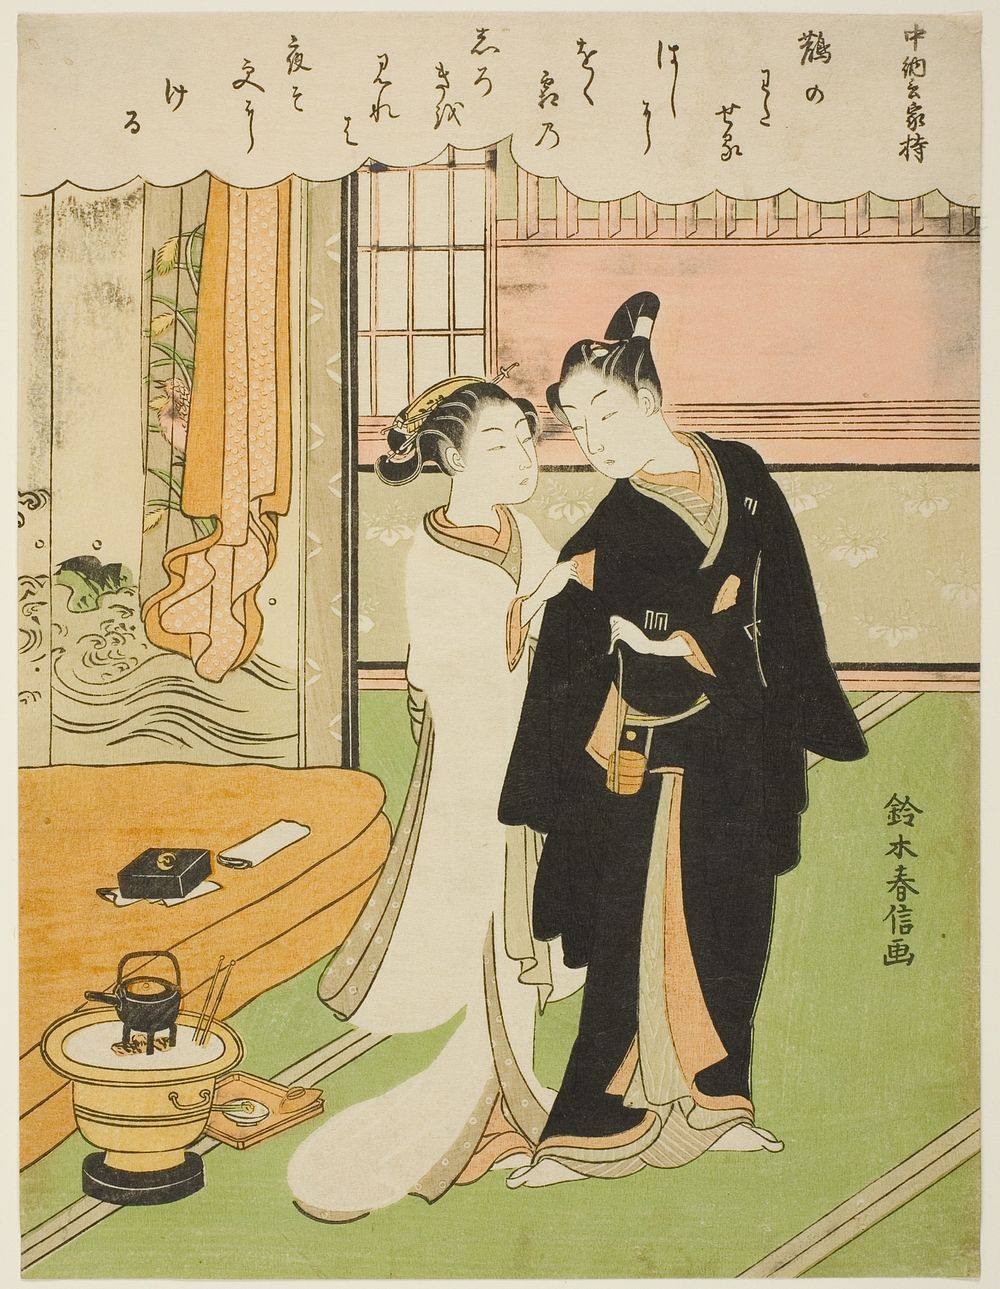 Poem by Chunagon Yakamochi, from an untitled series of One Hundred Poems by One Hundred Poets by Suzuki Harunobu